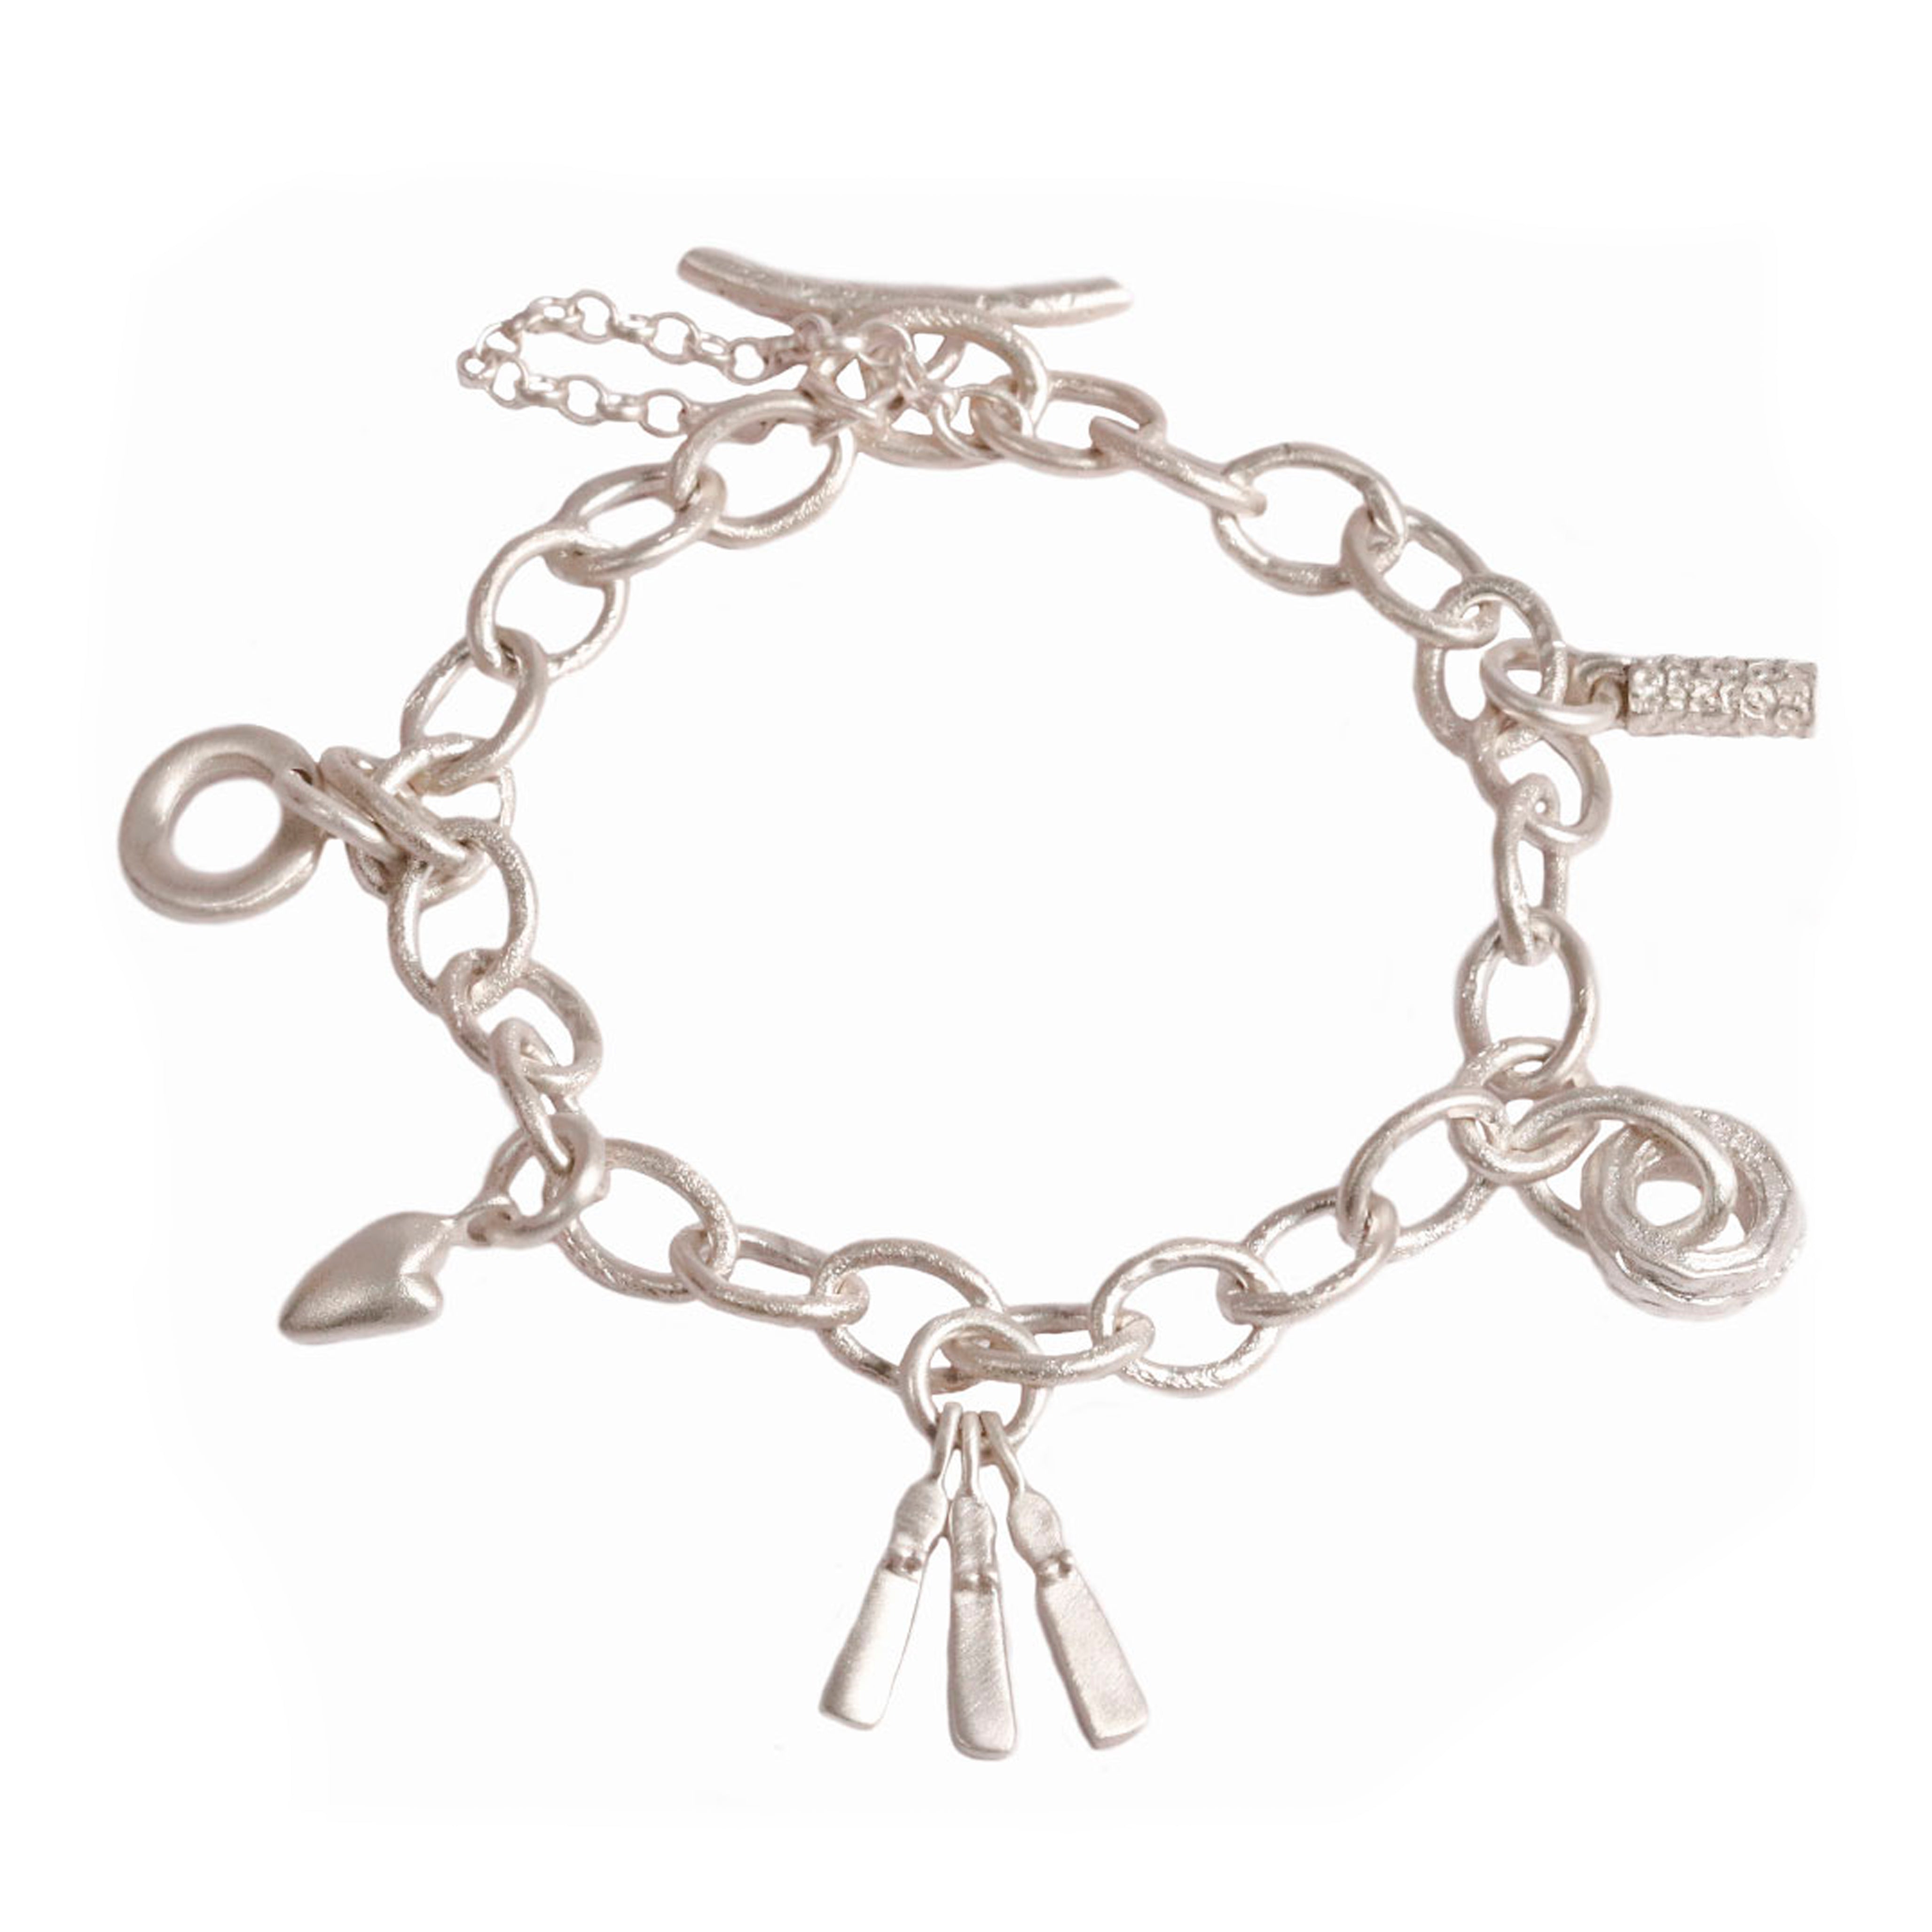 Nilu's Collection 925 Sterling Silver Hanging Heart Charm Bracelet for